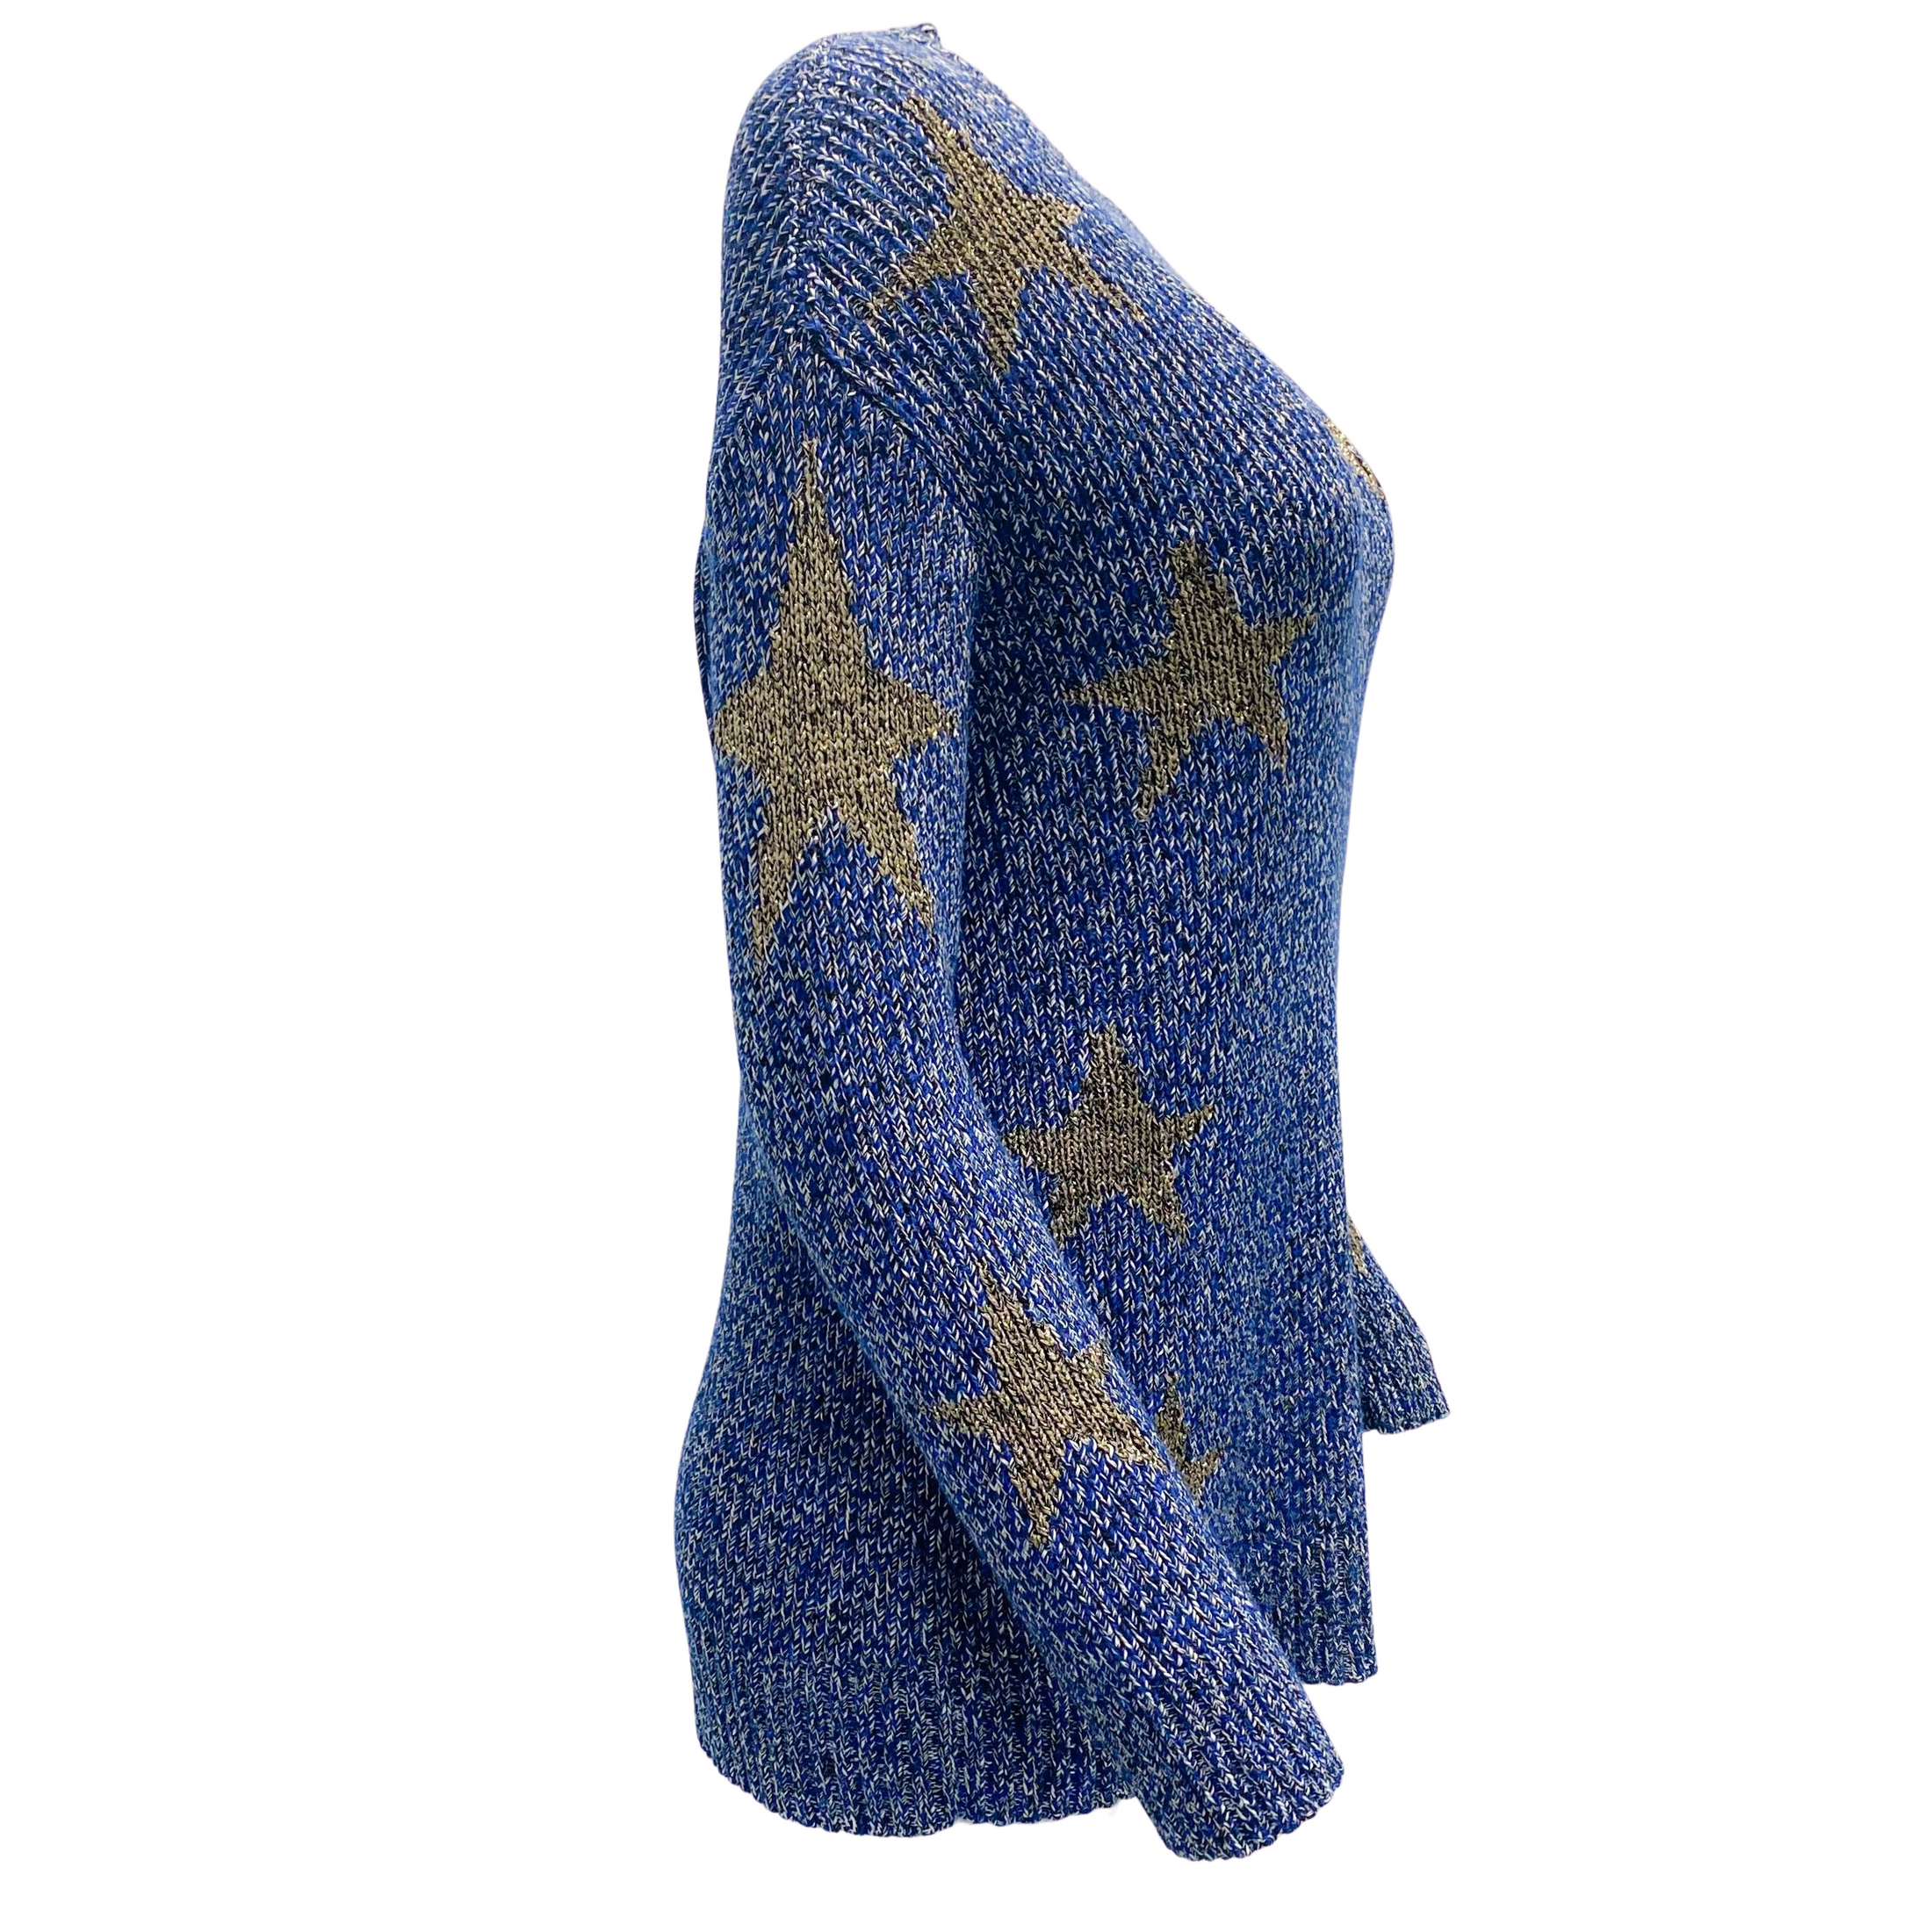 Valentino Blue and Gold Metallic Star Intarsia Mouliné Knit Sweater